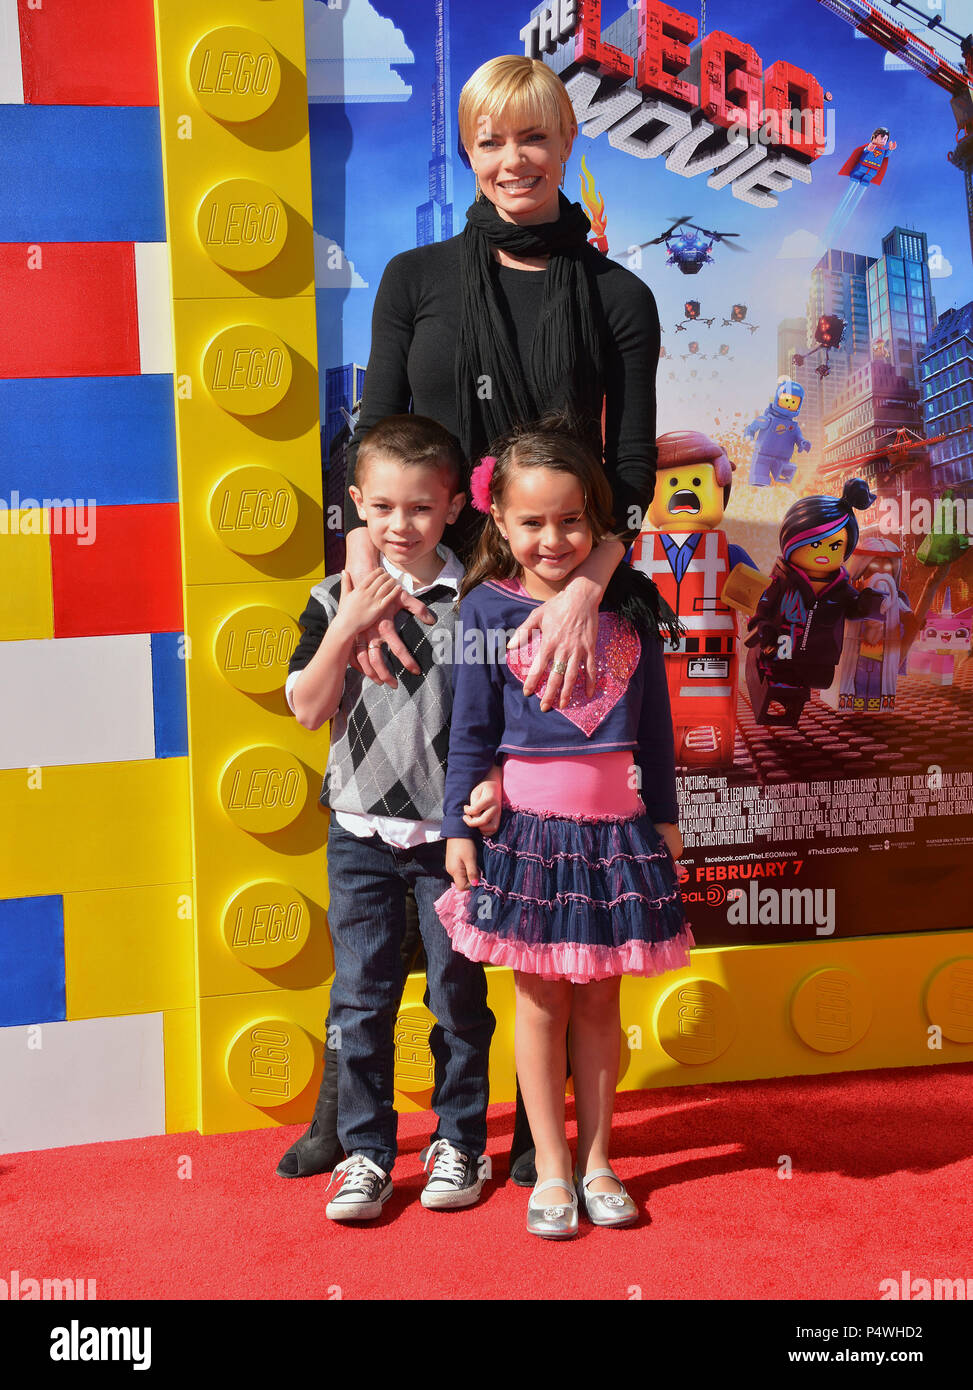 Dezi James Calvo; Jaime Pressly 136- arriving at The Lego Movie Premiere at the Westwood Village Theatre in Los Angeles.Dezi James Calvo; Jaime Pressly 136- ------------- Red Carpet Event, Vertical, USA, Film Industry, Celebrities,  Photography, Bestof, Arts Culture and Entertainment, Topix Celebrities fashion /  Vertical, Best of, Event in Hollywood Life - California,  Red Carpet and backstage, USA, Film Industry, Celebrities,  movie celebrities, TV celebrities, Music celebrities, Photography, Bestof, Arts Culture and Entertainment,  Topix, vertical,  family from from the year , 2014, inquiry Stock Photo